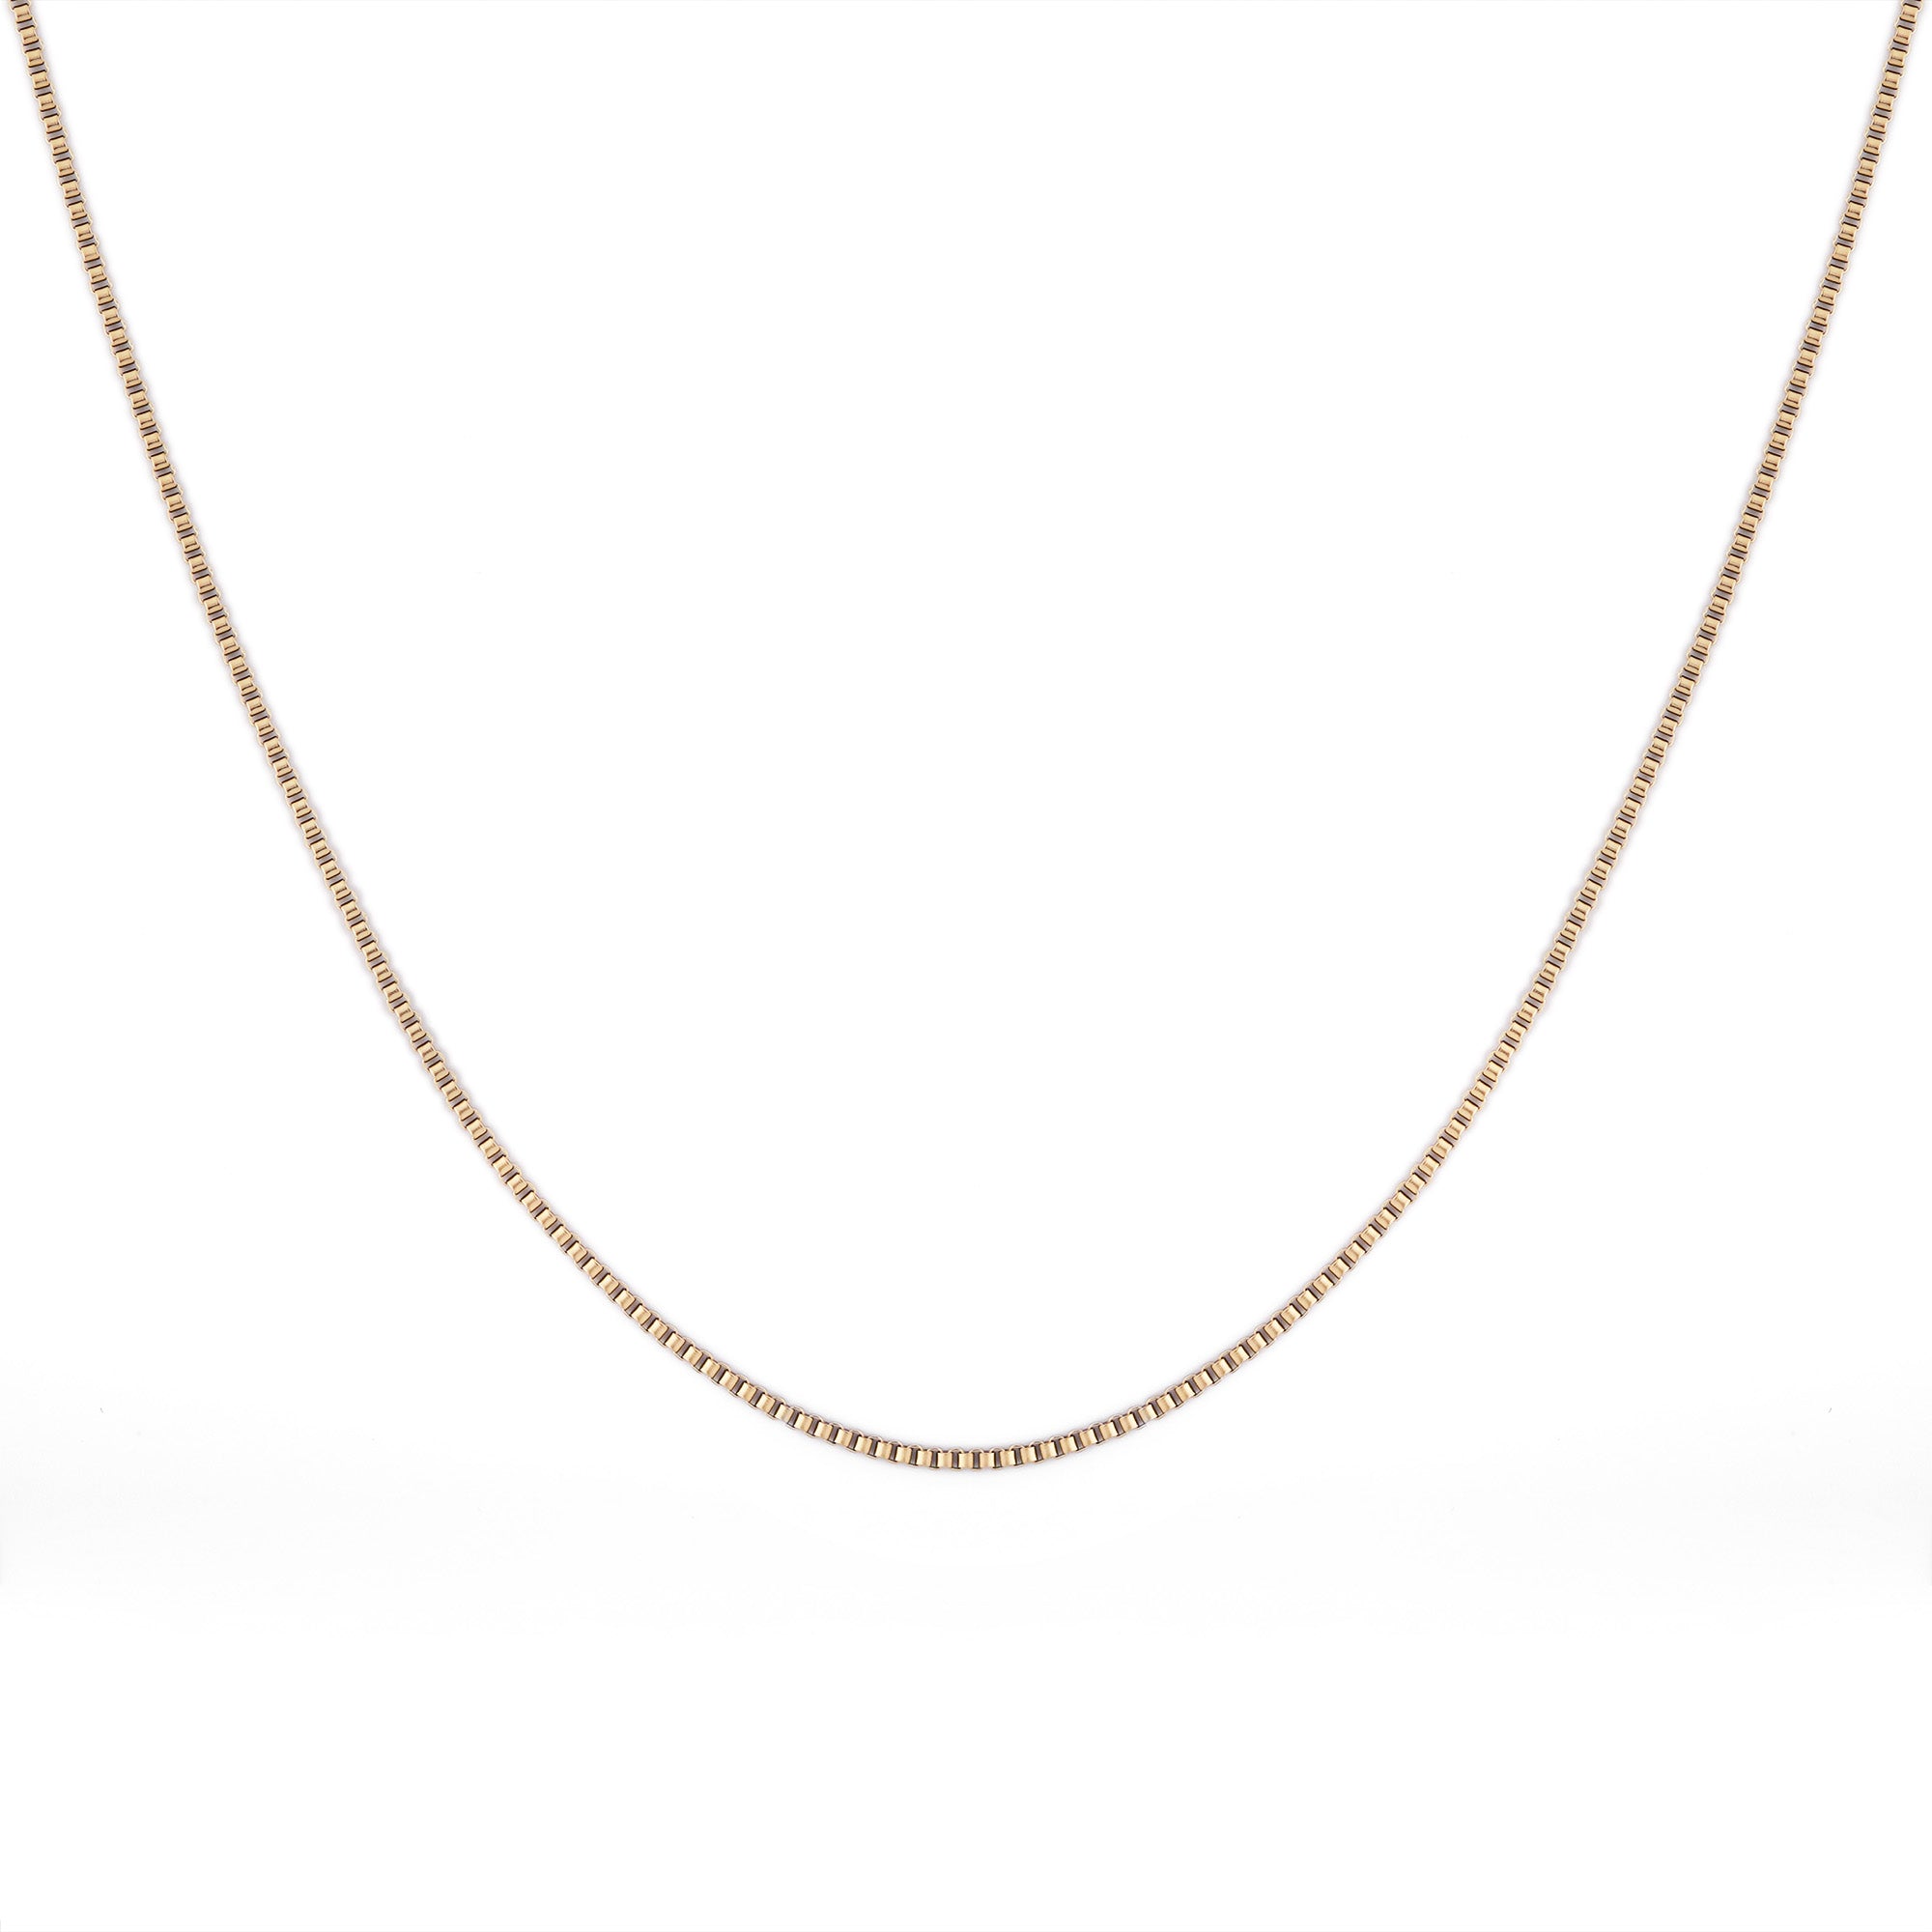 Clyd necklace by Five Jwlry for men, designed in Montreal. Features a 1.5mm square box chain in 14k gold color, highlighted with the brand's signature logo tag.